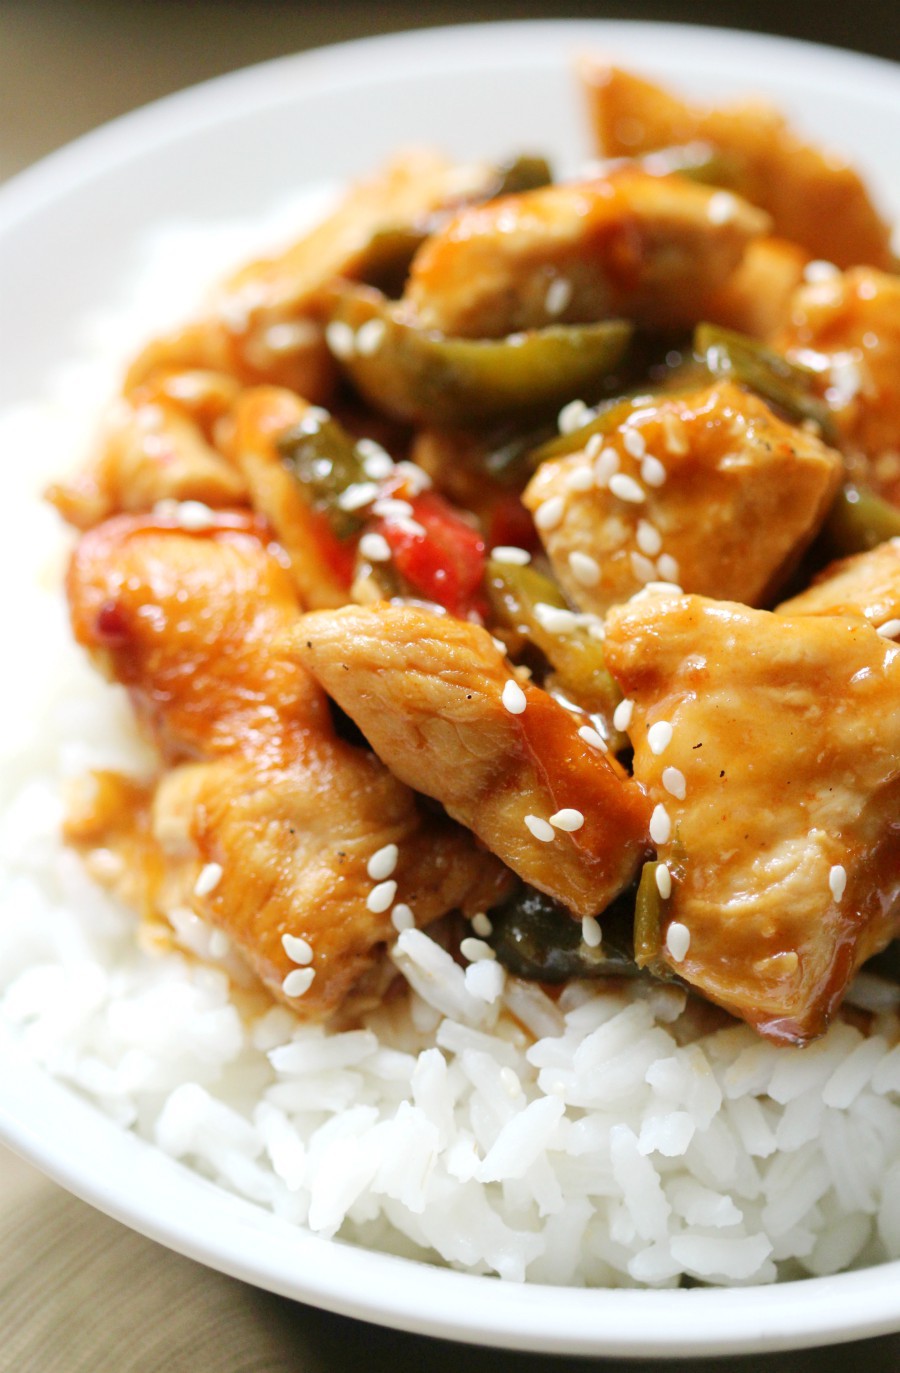 Gluten-Free General Tso's Chicken (Soy-Free, Paleo, Top 8 Allergy-Free) | Strength and Sunshine @RebeccaGF666 A sweet and slightly spicy Chinese takeout favorite you can easily make right at home! This recipe for Gluten-Free General Tso's Chicken is soy-free, paleo, top-8 allergy-free, and can be whipped up for the dinner table in a flash! #generaltsoschicken #chickendinner #glutenfree #chinesetakeout #strengthandsunshine